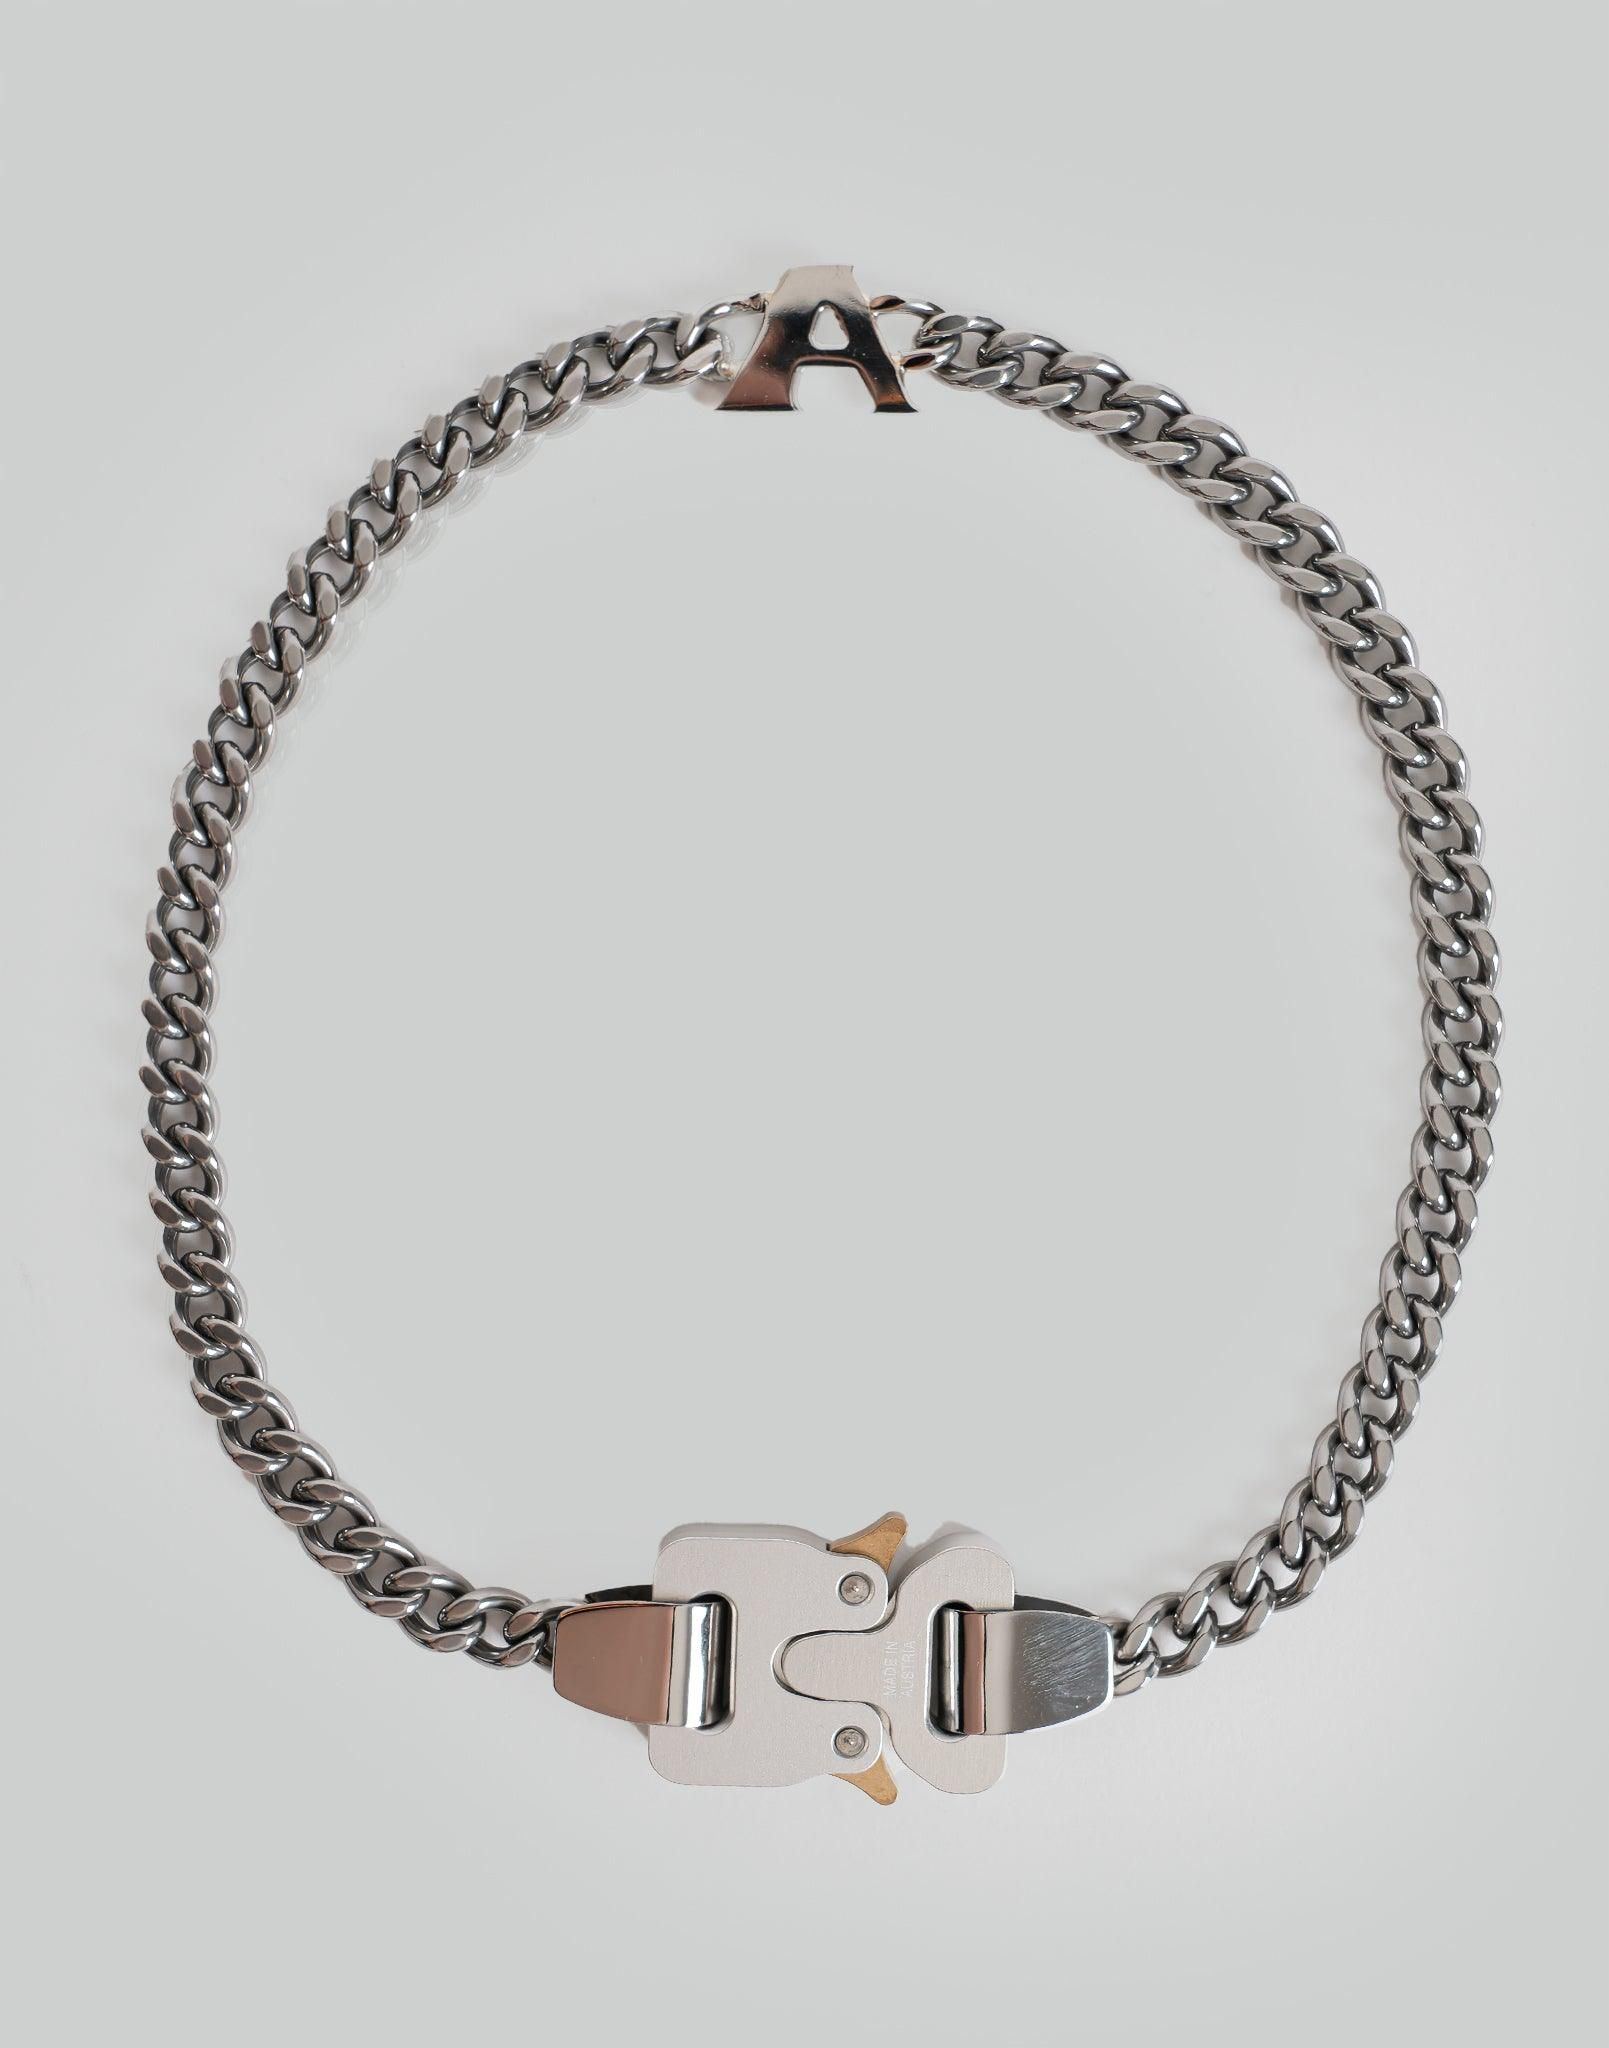 1017 ALYX 9SM BUCKLE NECKLACE WITH CHARM - 082plus